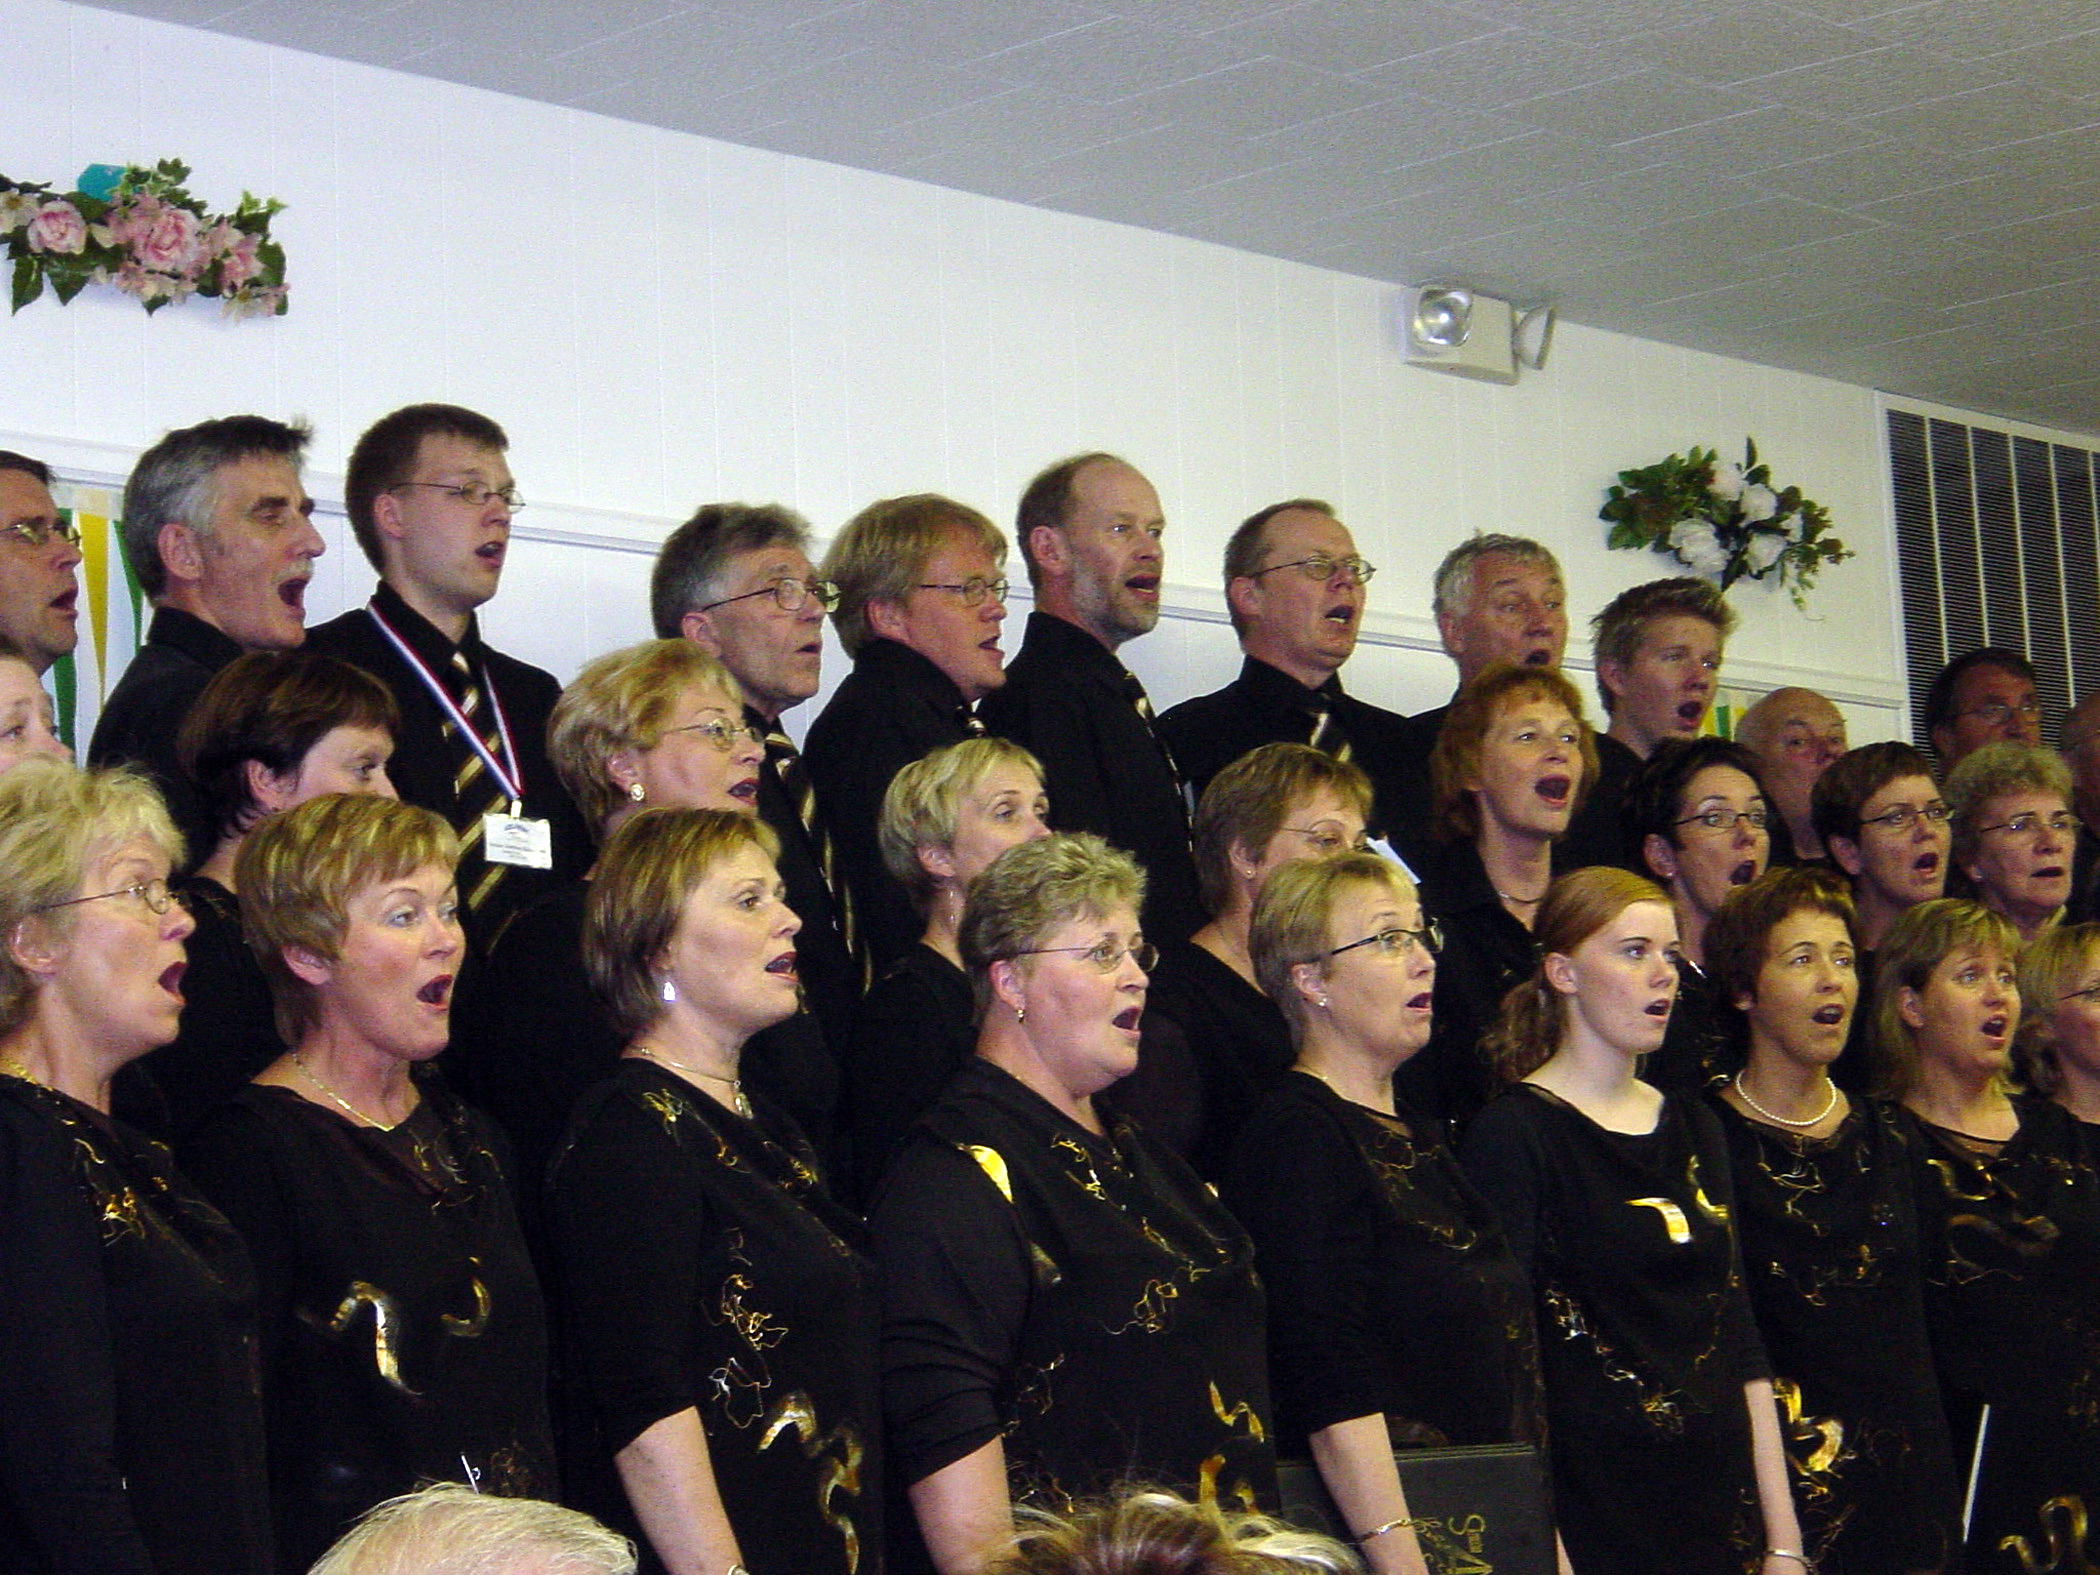 A portion of 45 members of the Selfoss, Iceland, Choir who paid their own expense to come to Utah for the commemoration.